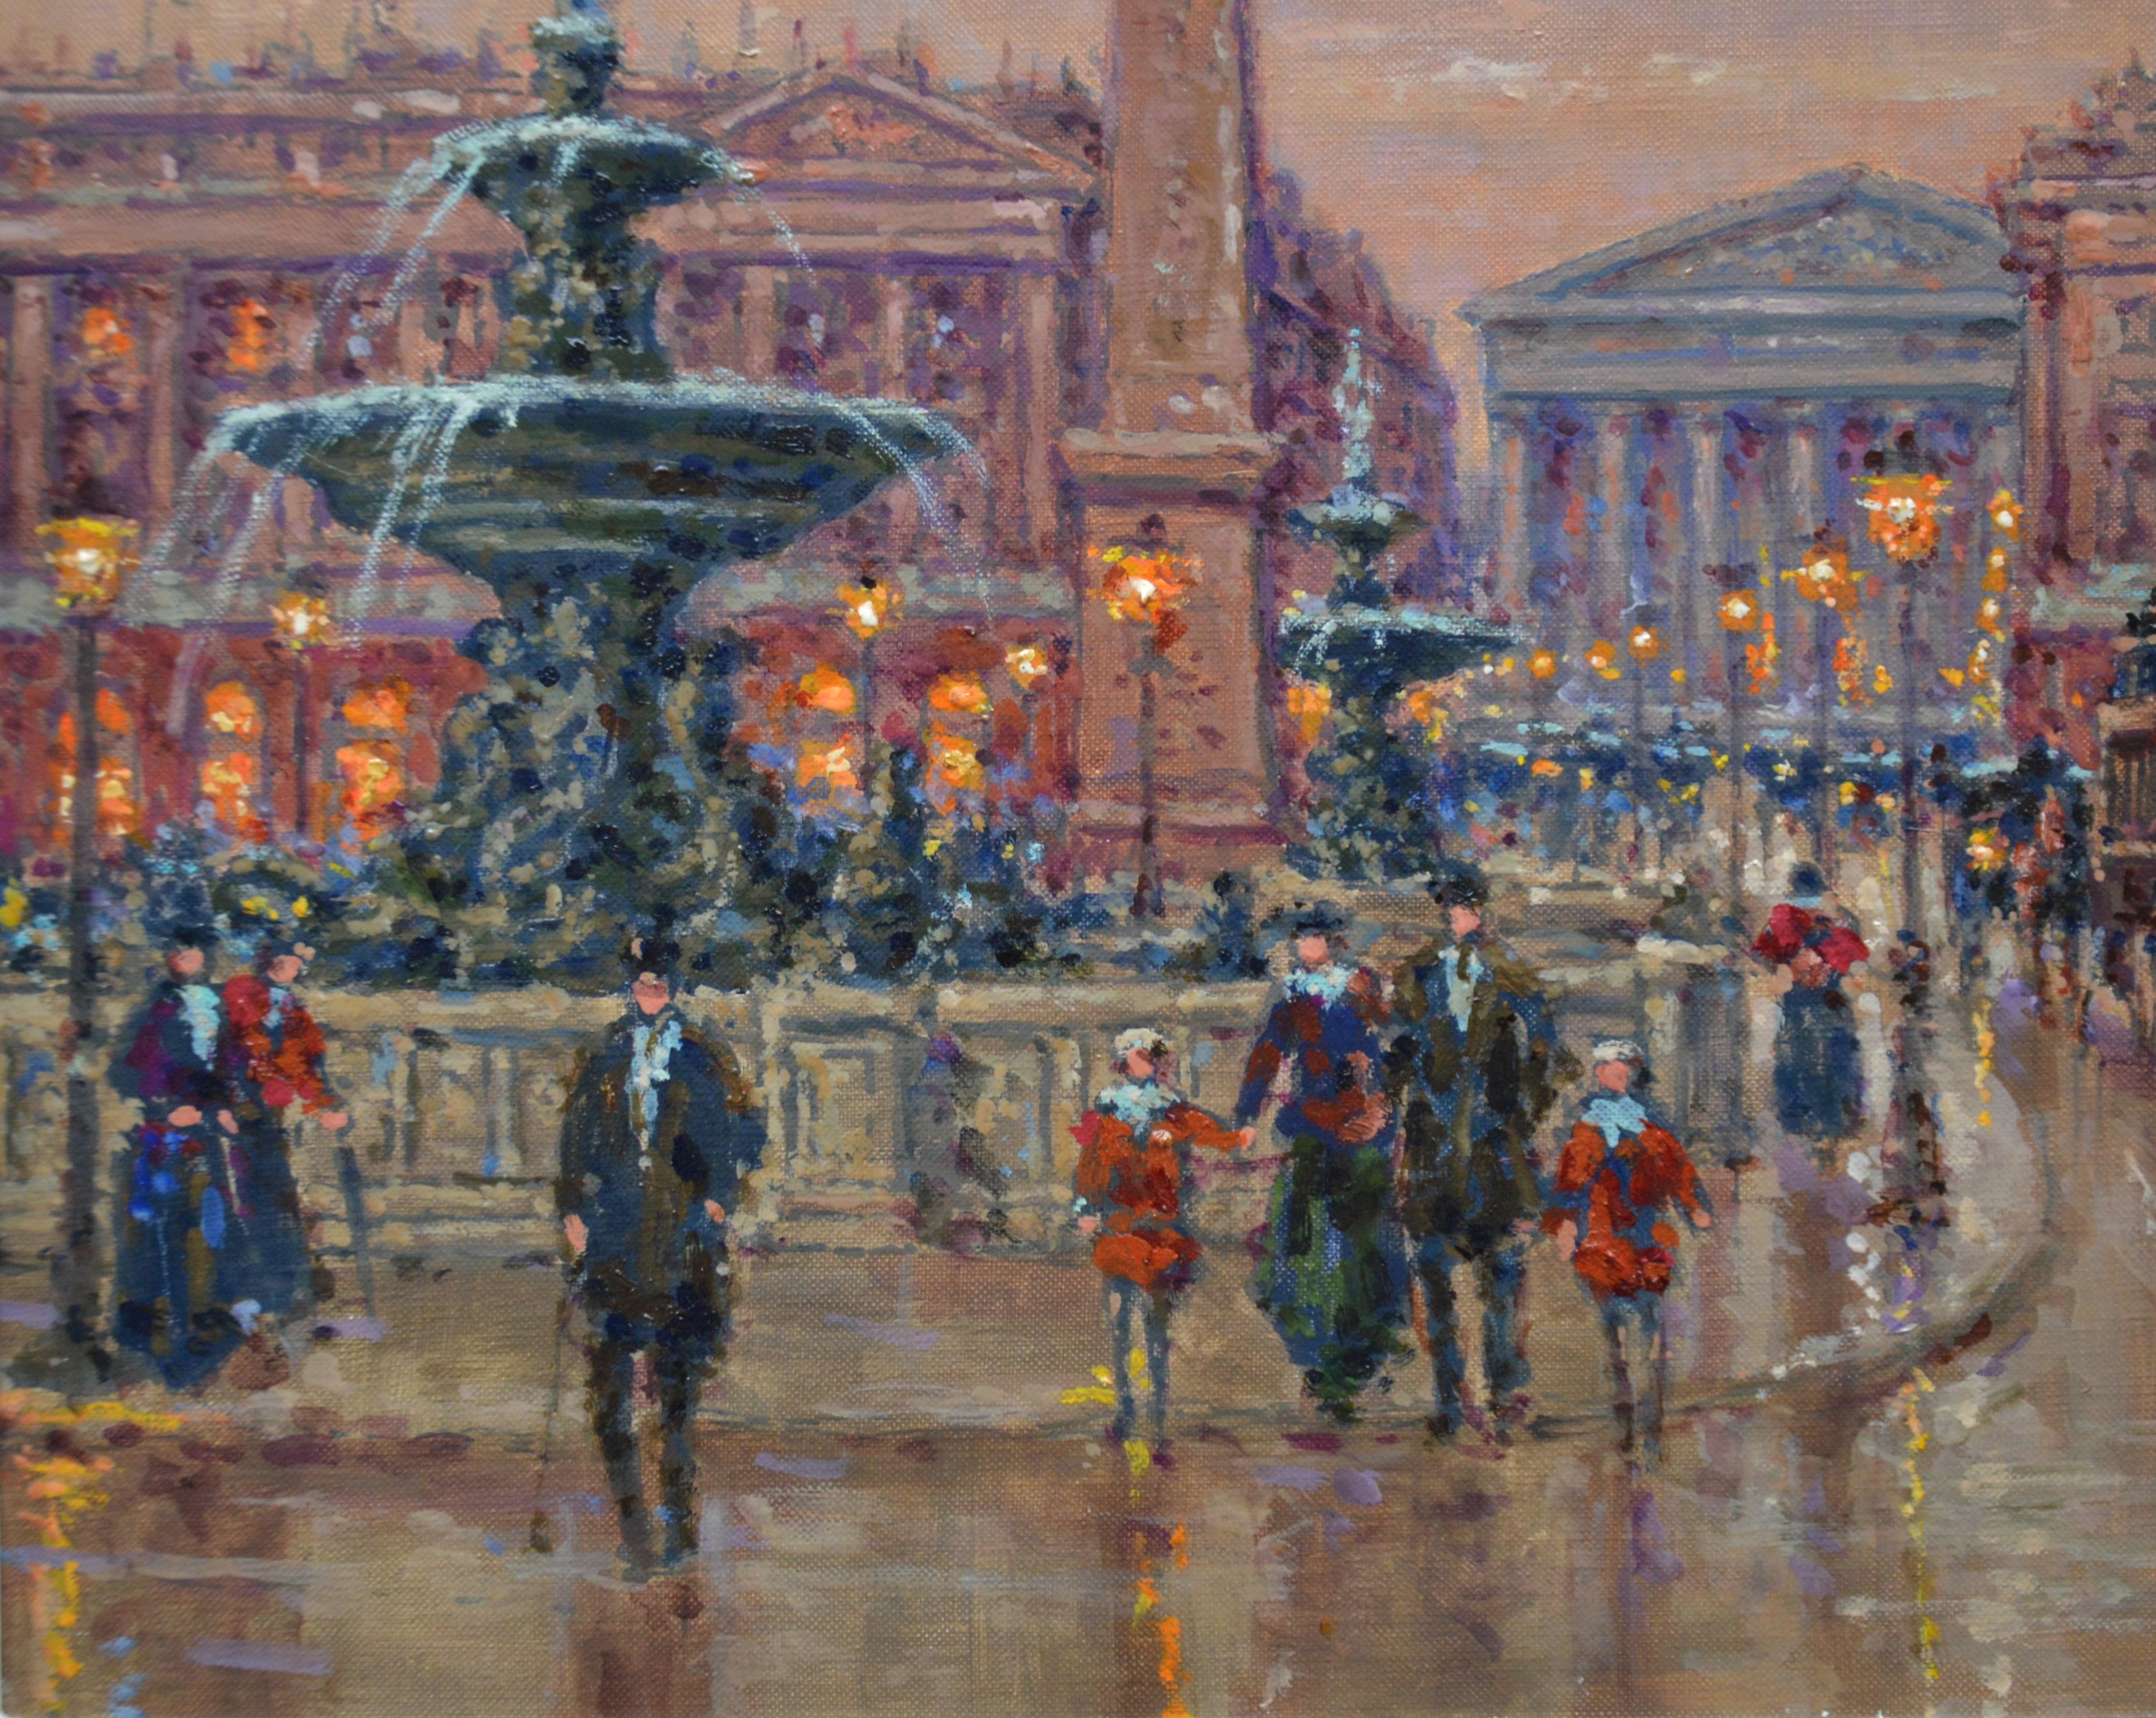 ‘Place de la Concorde au Crépuscule’ by Andre Boyer (1909-1981). 

The painting – which depicts a busy Belle Epoque scene of the Place de la Concorde in Paris at dusk – is signed by the artist and presented in a newly commissioned post-impressionist